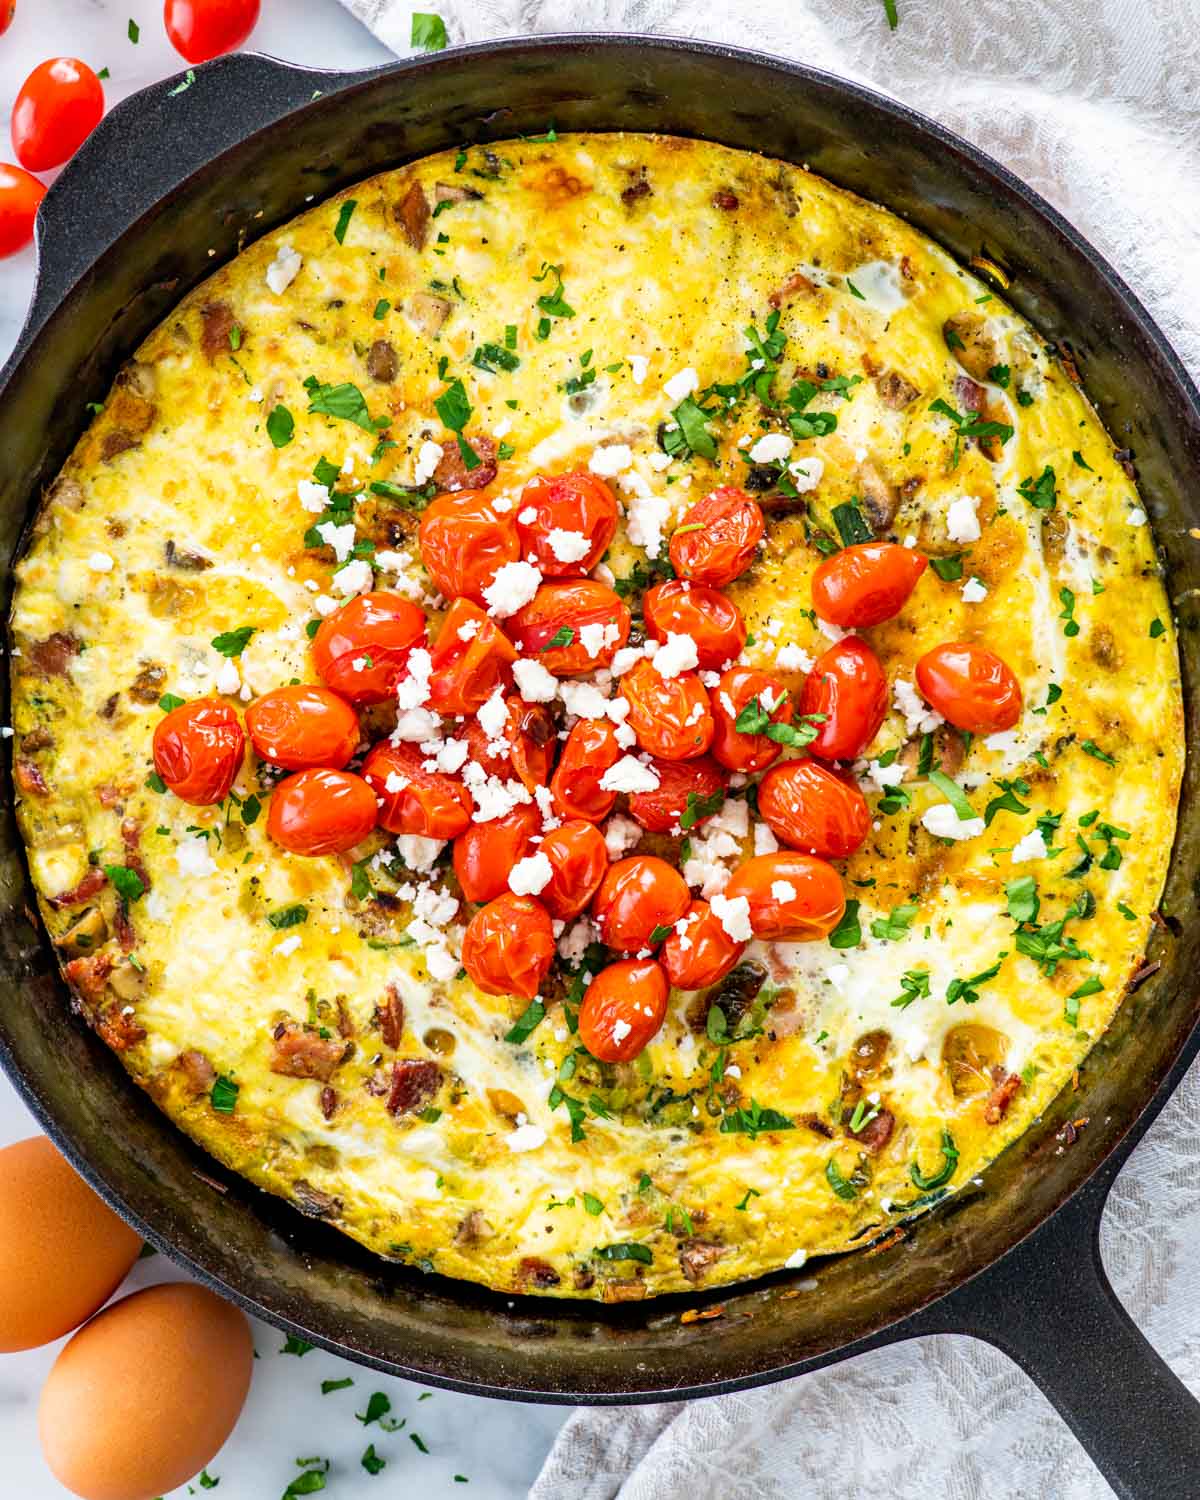 freshly baked frittata in a black skillet garnished with roasted tomatoes.